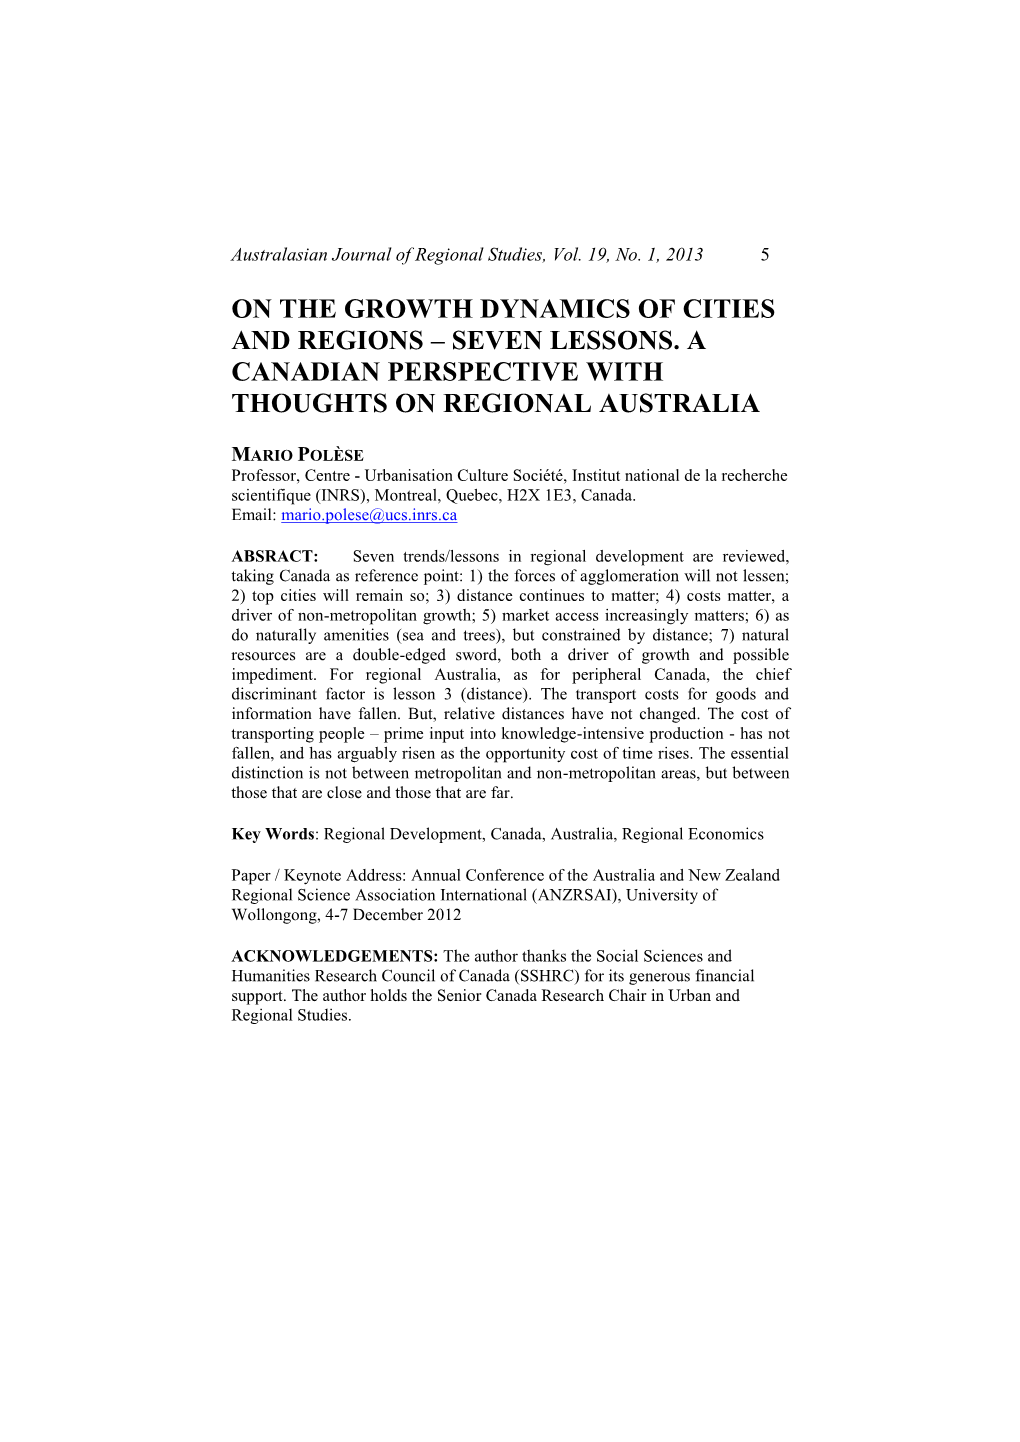 On the Growth Dynamics of Cities and Regions Seven